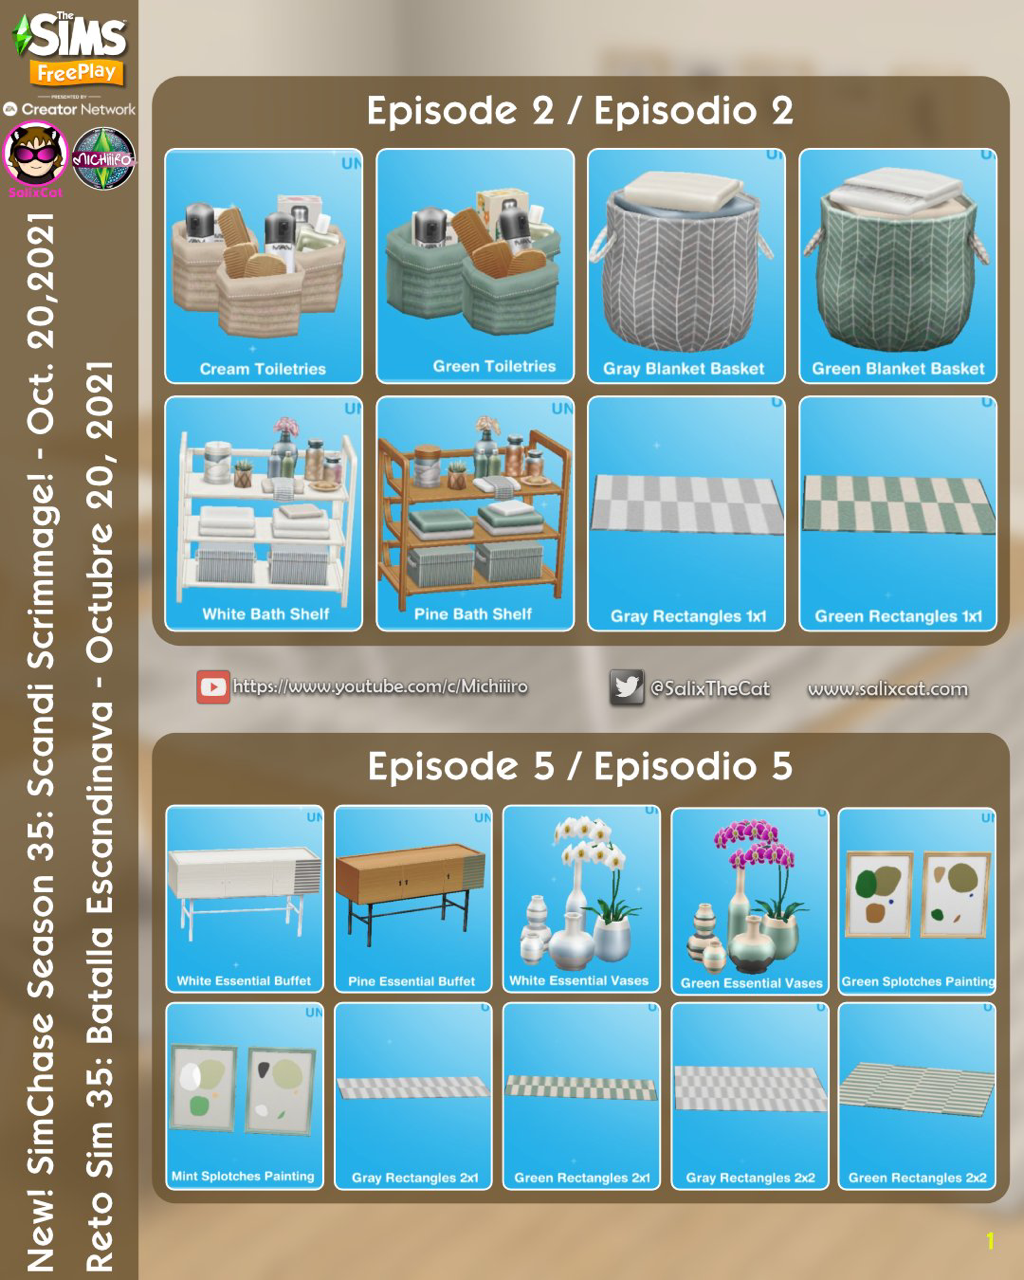 Sale in The Sims Freeplay! – Platinum Simmers